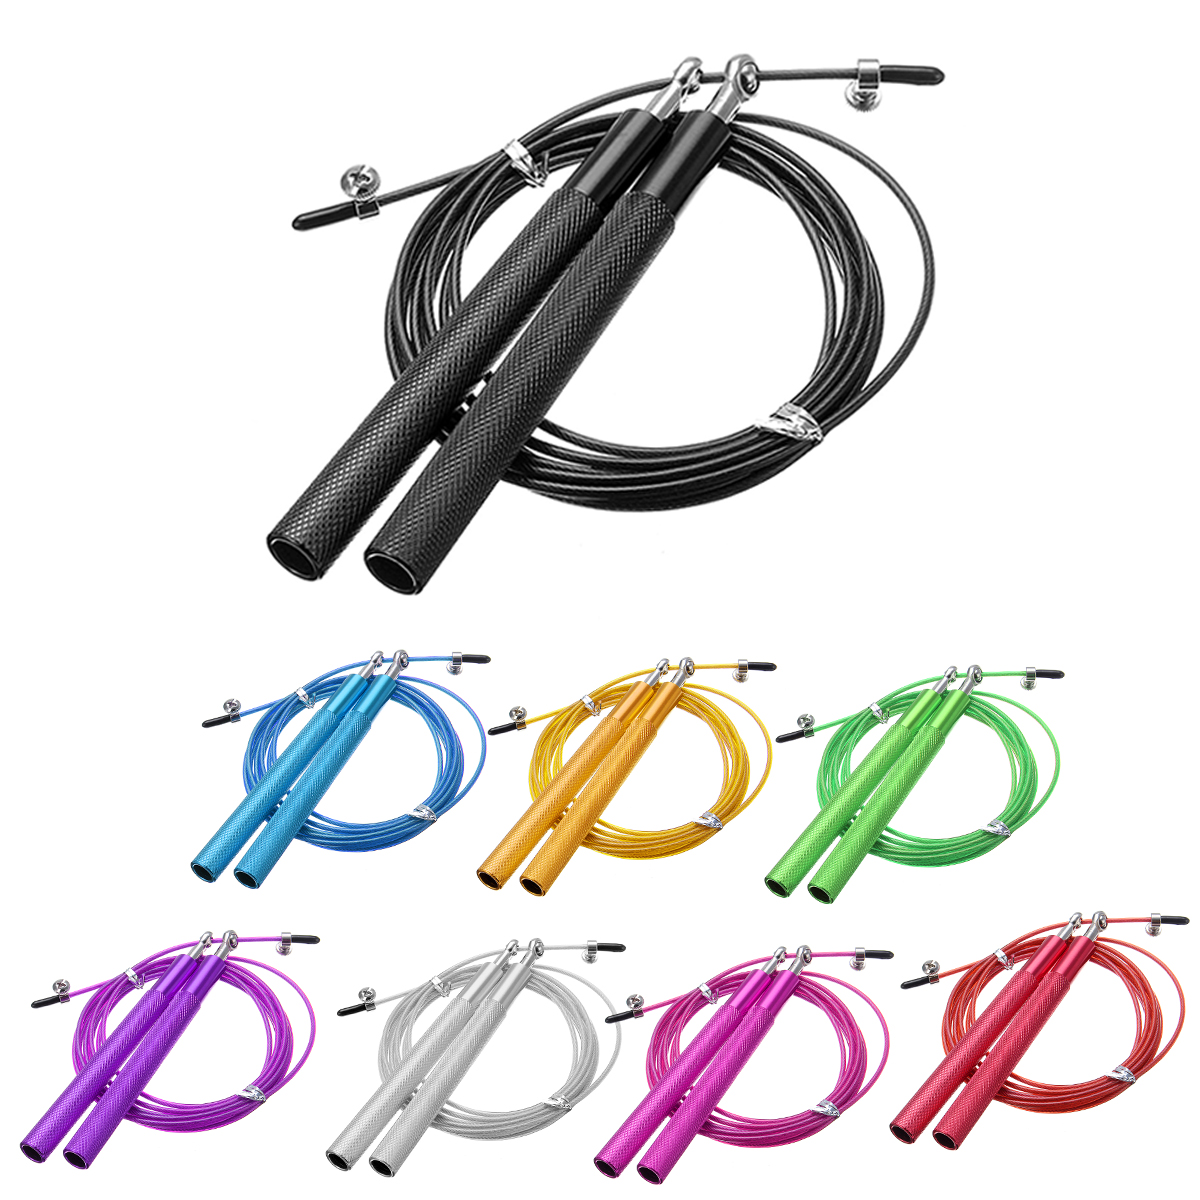 Aluminum-Speed-Rope-Jumping-Sports-Fitness-Exercise-Skipping-Rope-Cardio-Cable-1592088-5